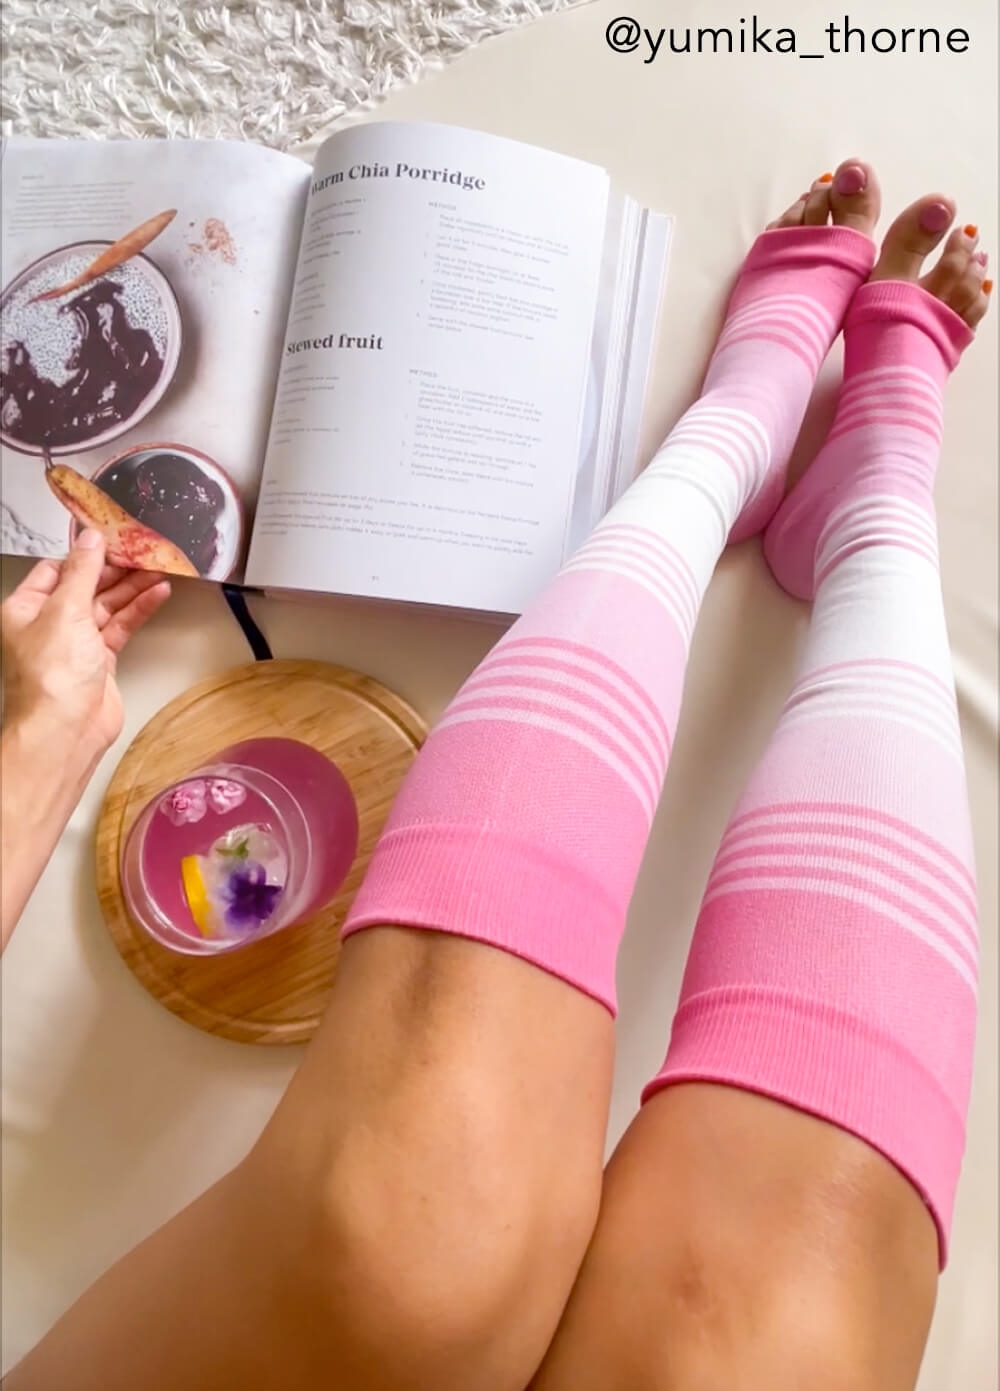 Mama Sox - Inspire Open Toe Maternity Compression Socks in Pink Stripes